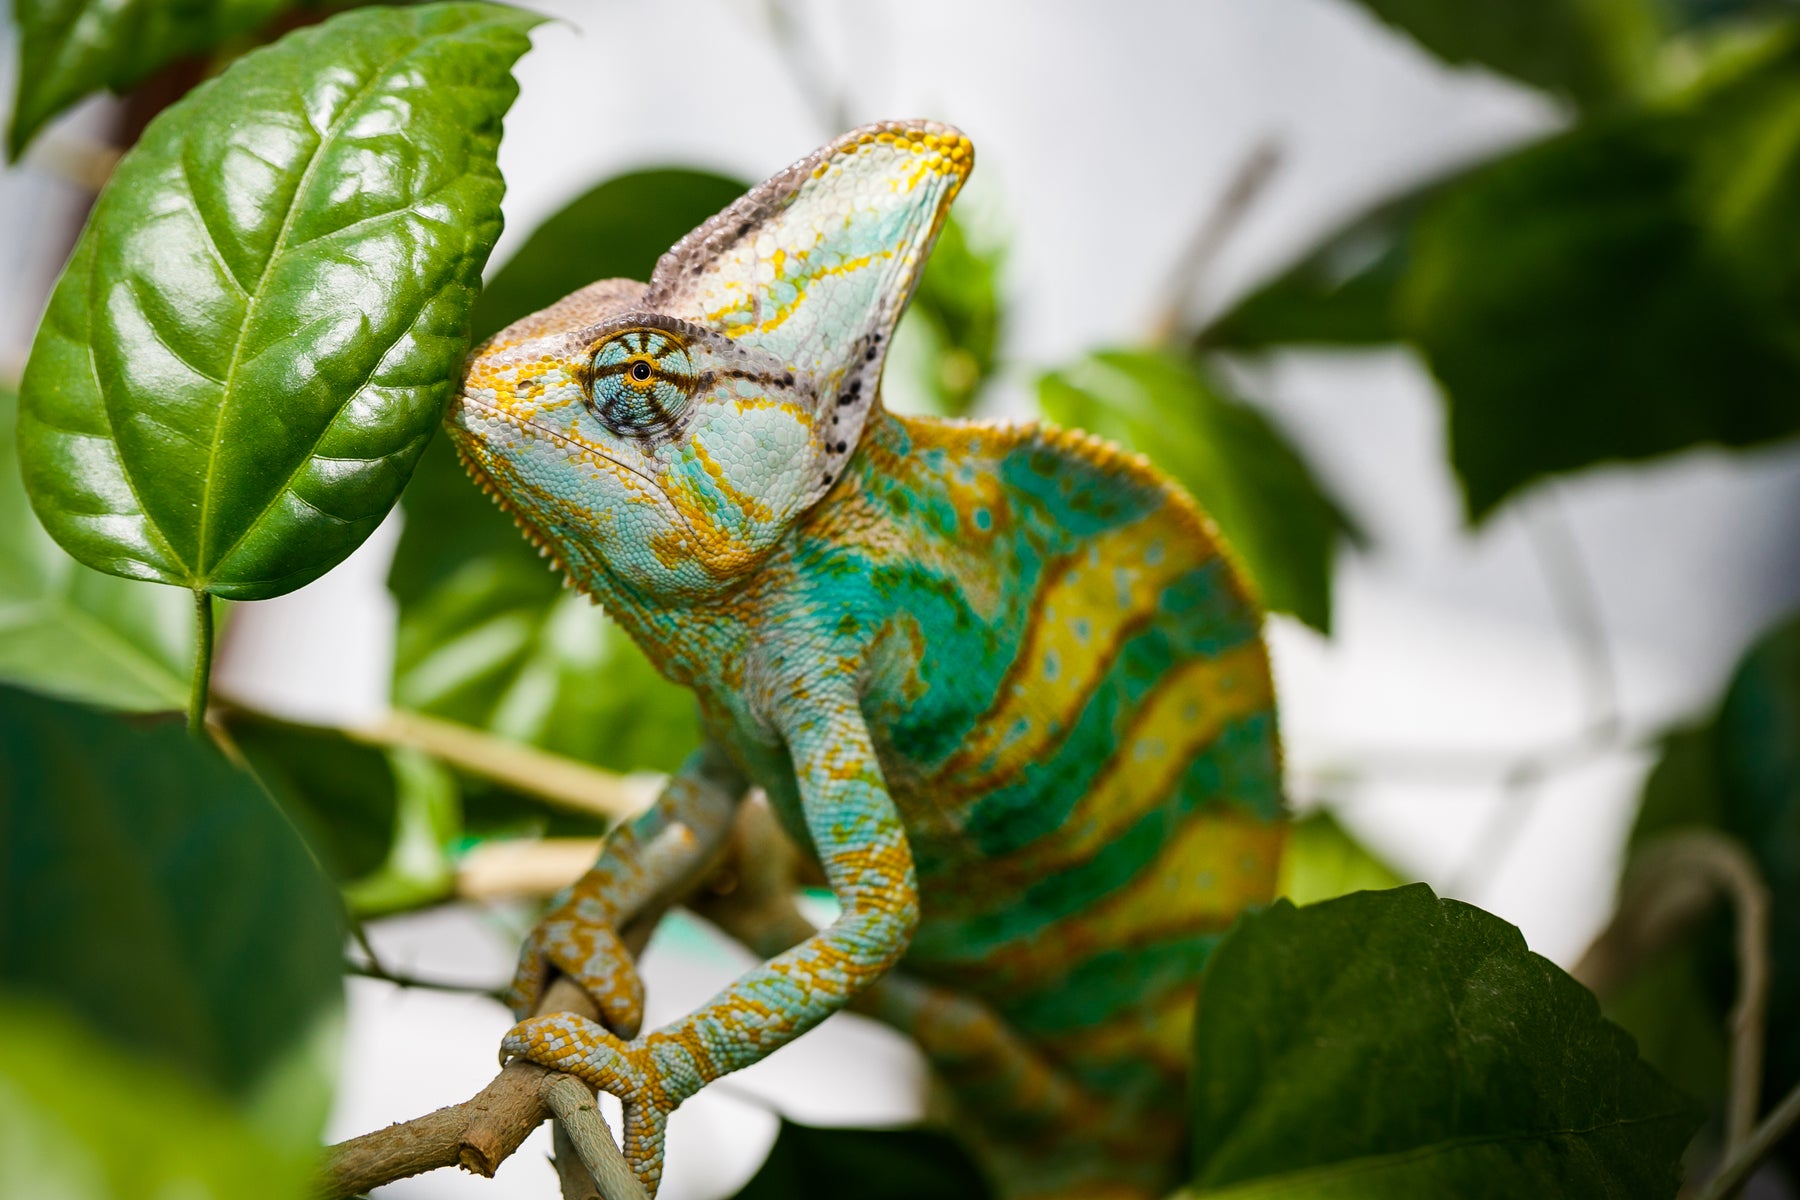 How to Care for Your Veiled Chameleon